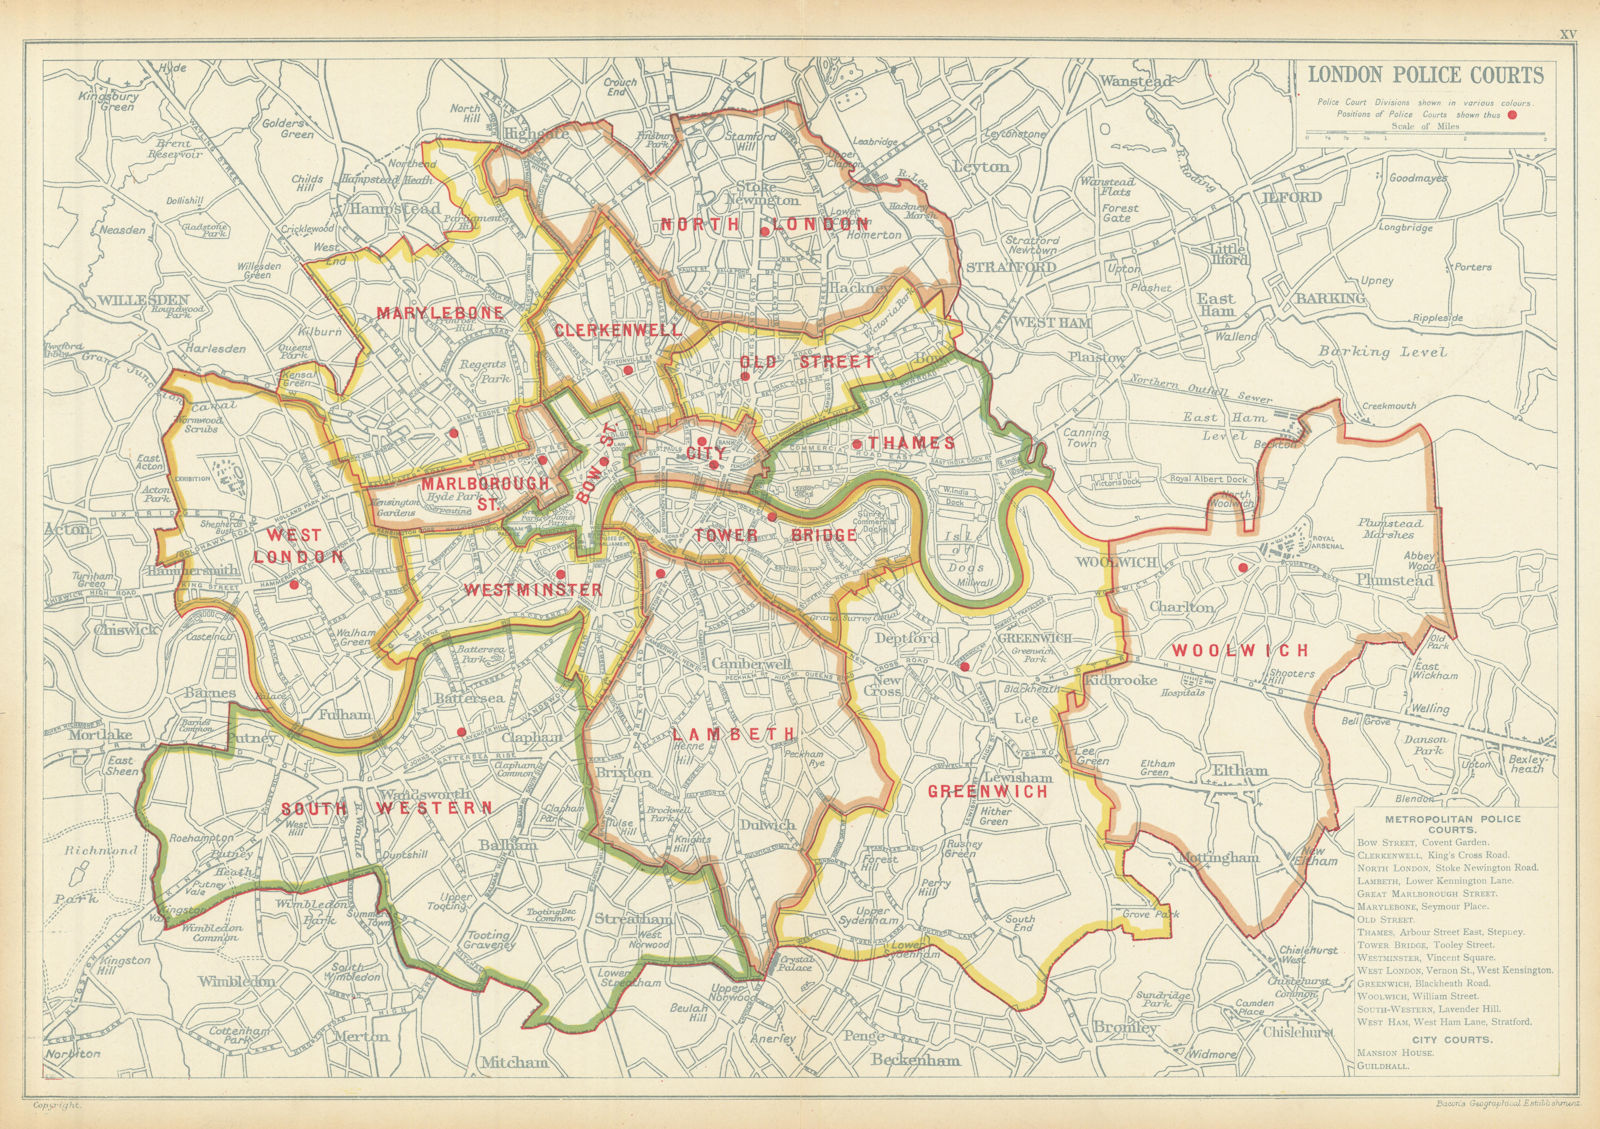 Associate Product LONDON POLICE COURTS. Showing divisions & court locations. BACON 1913 old map